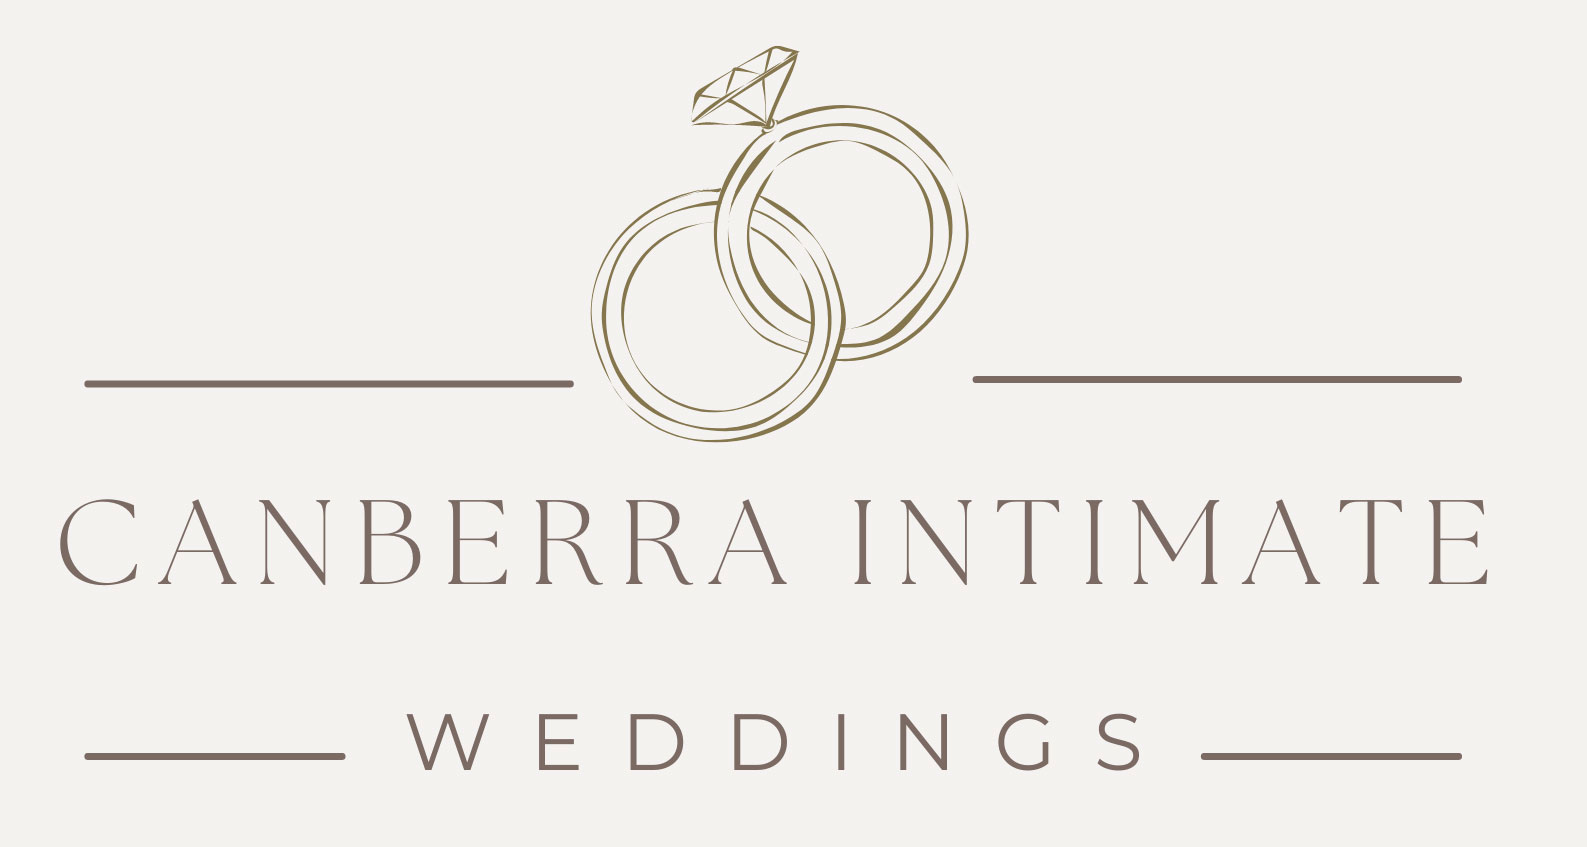 Canberra Intimate Weddings